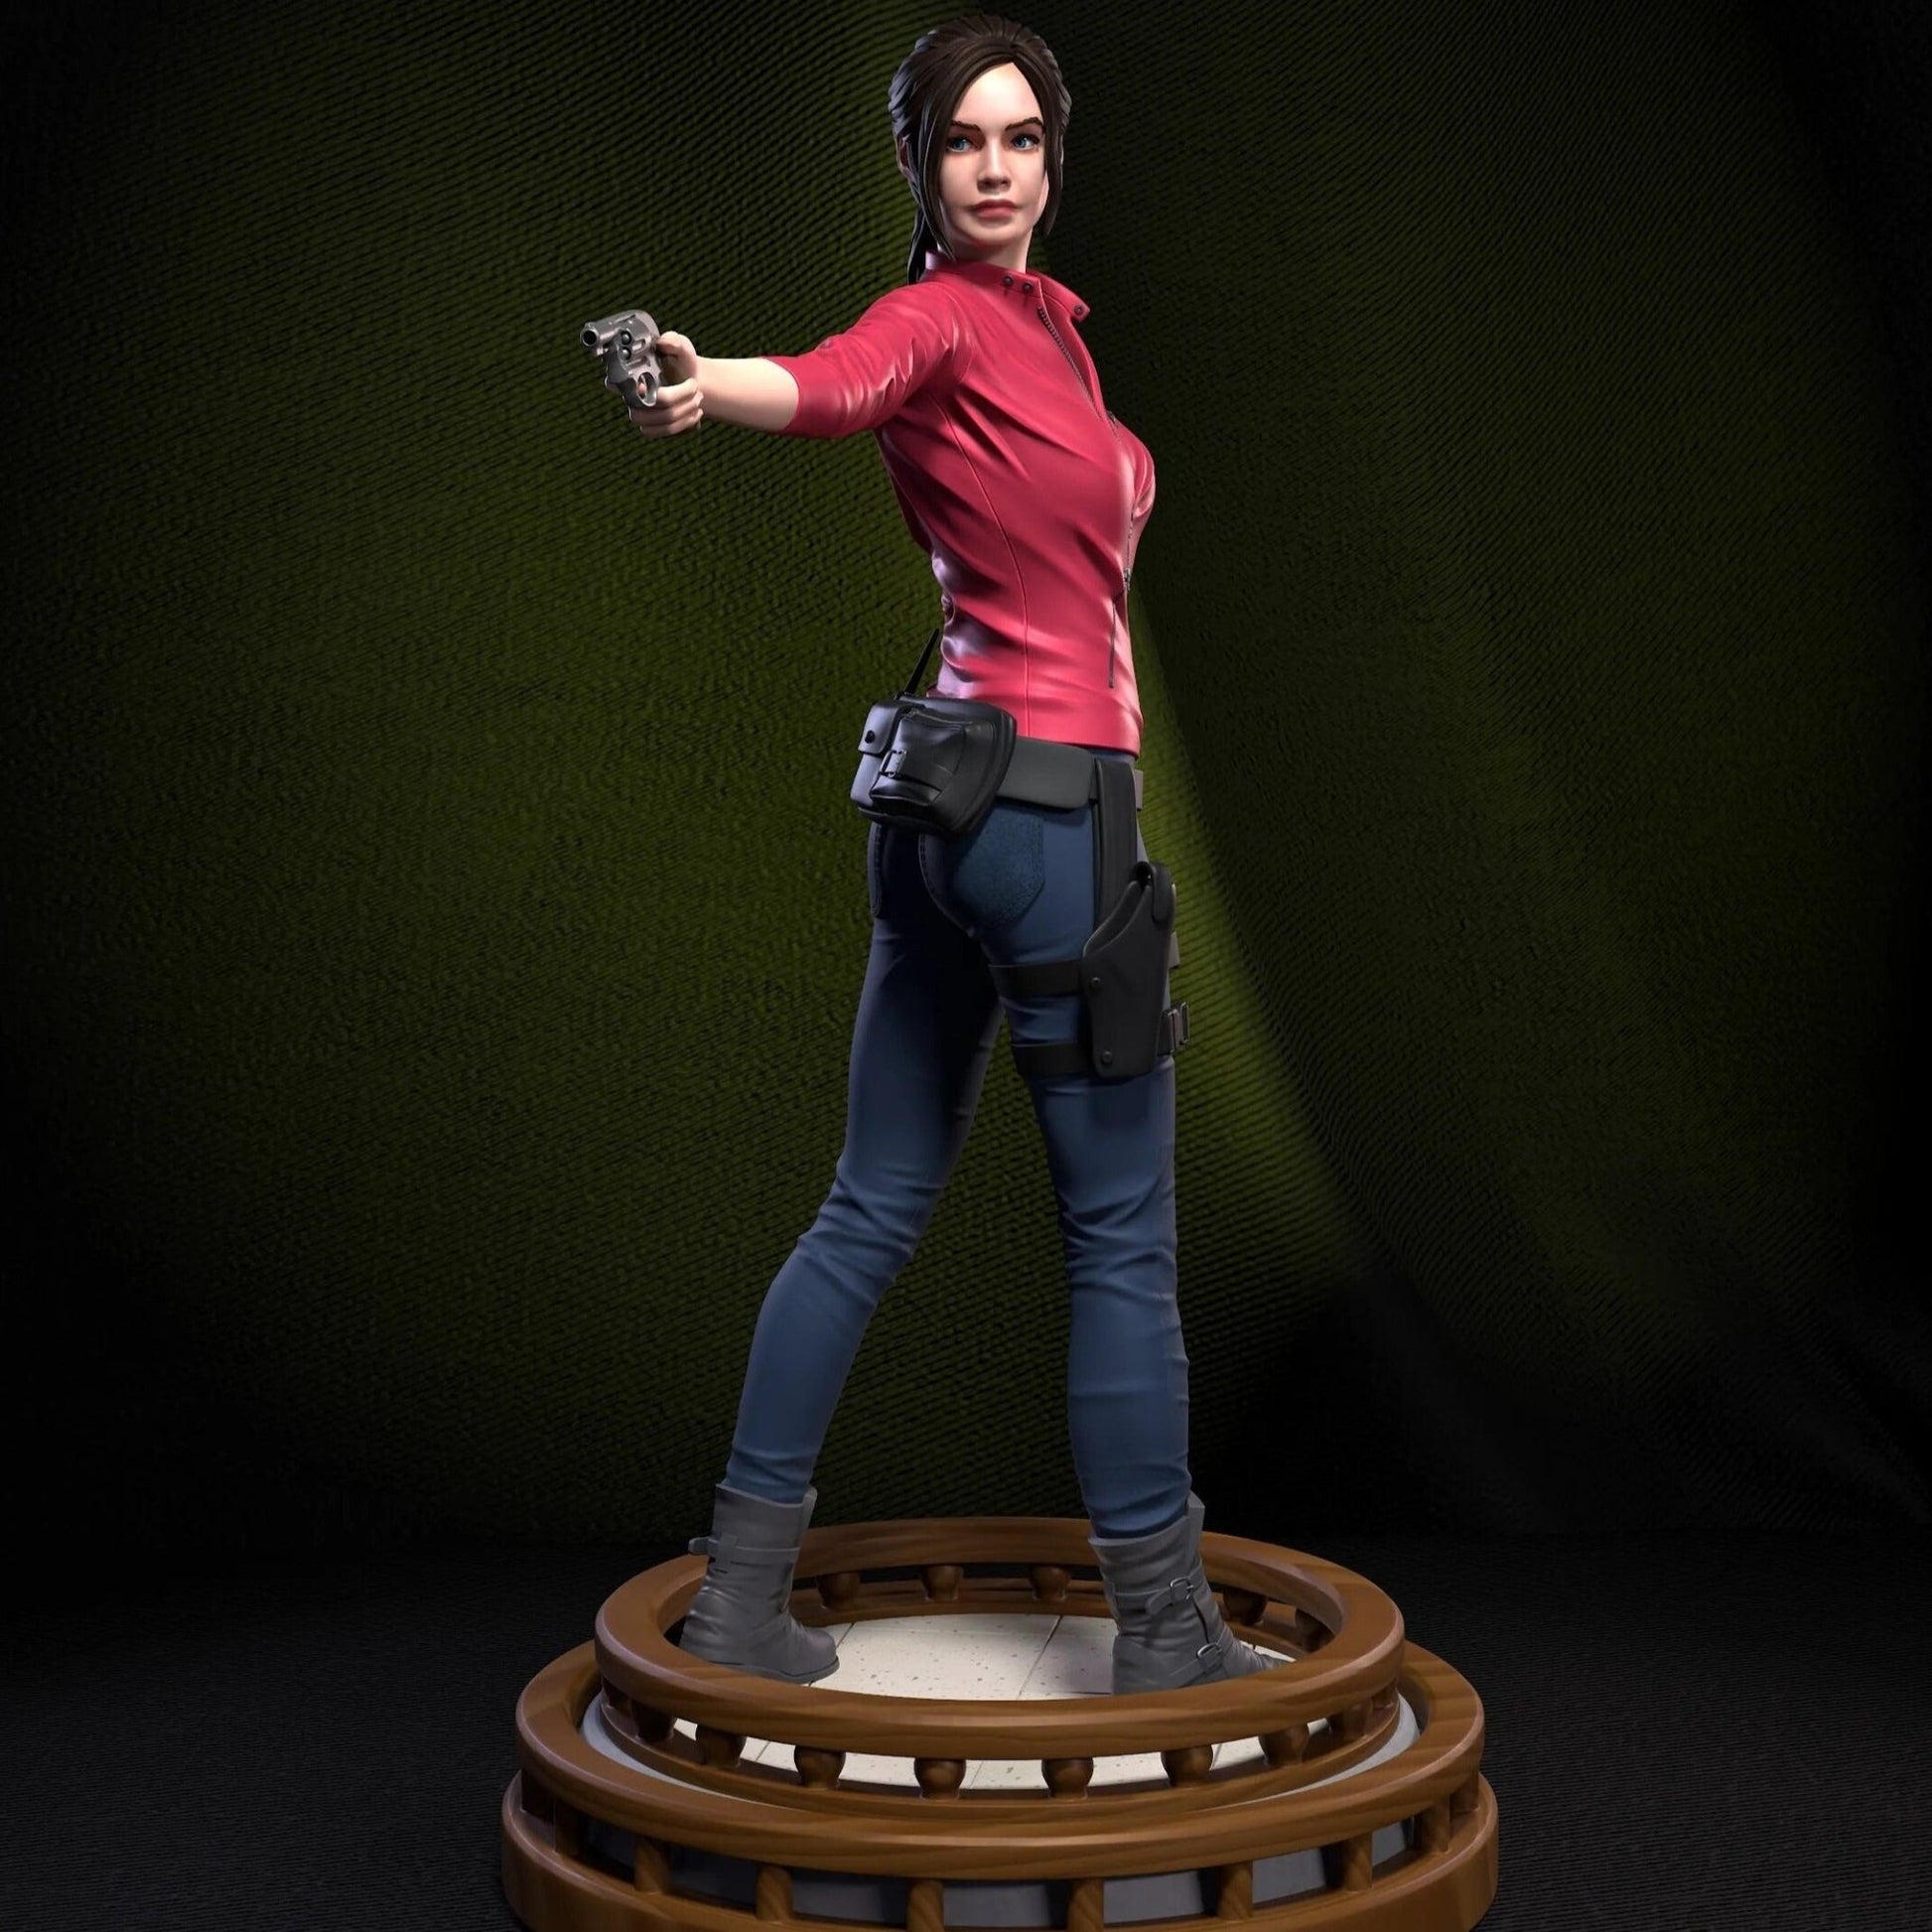 Claire Redfield Collectibles